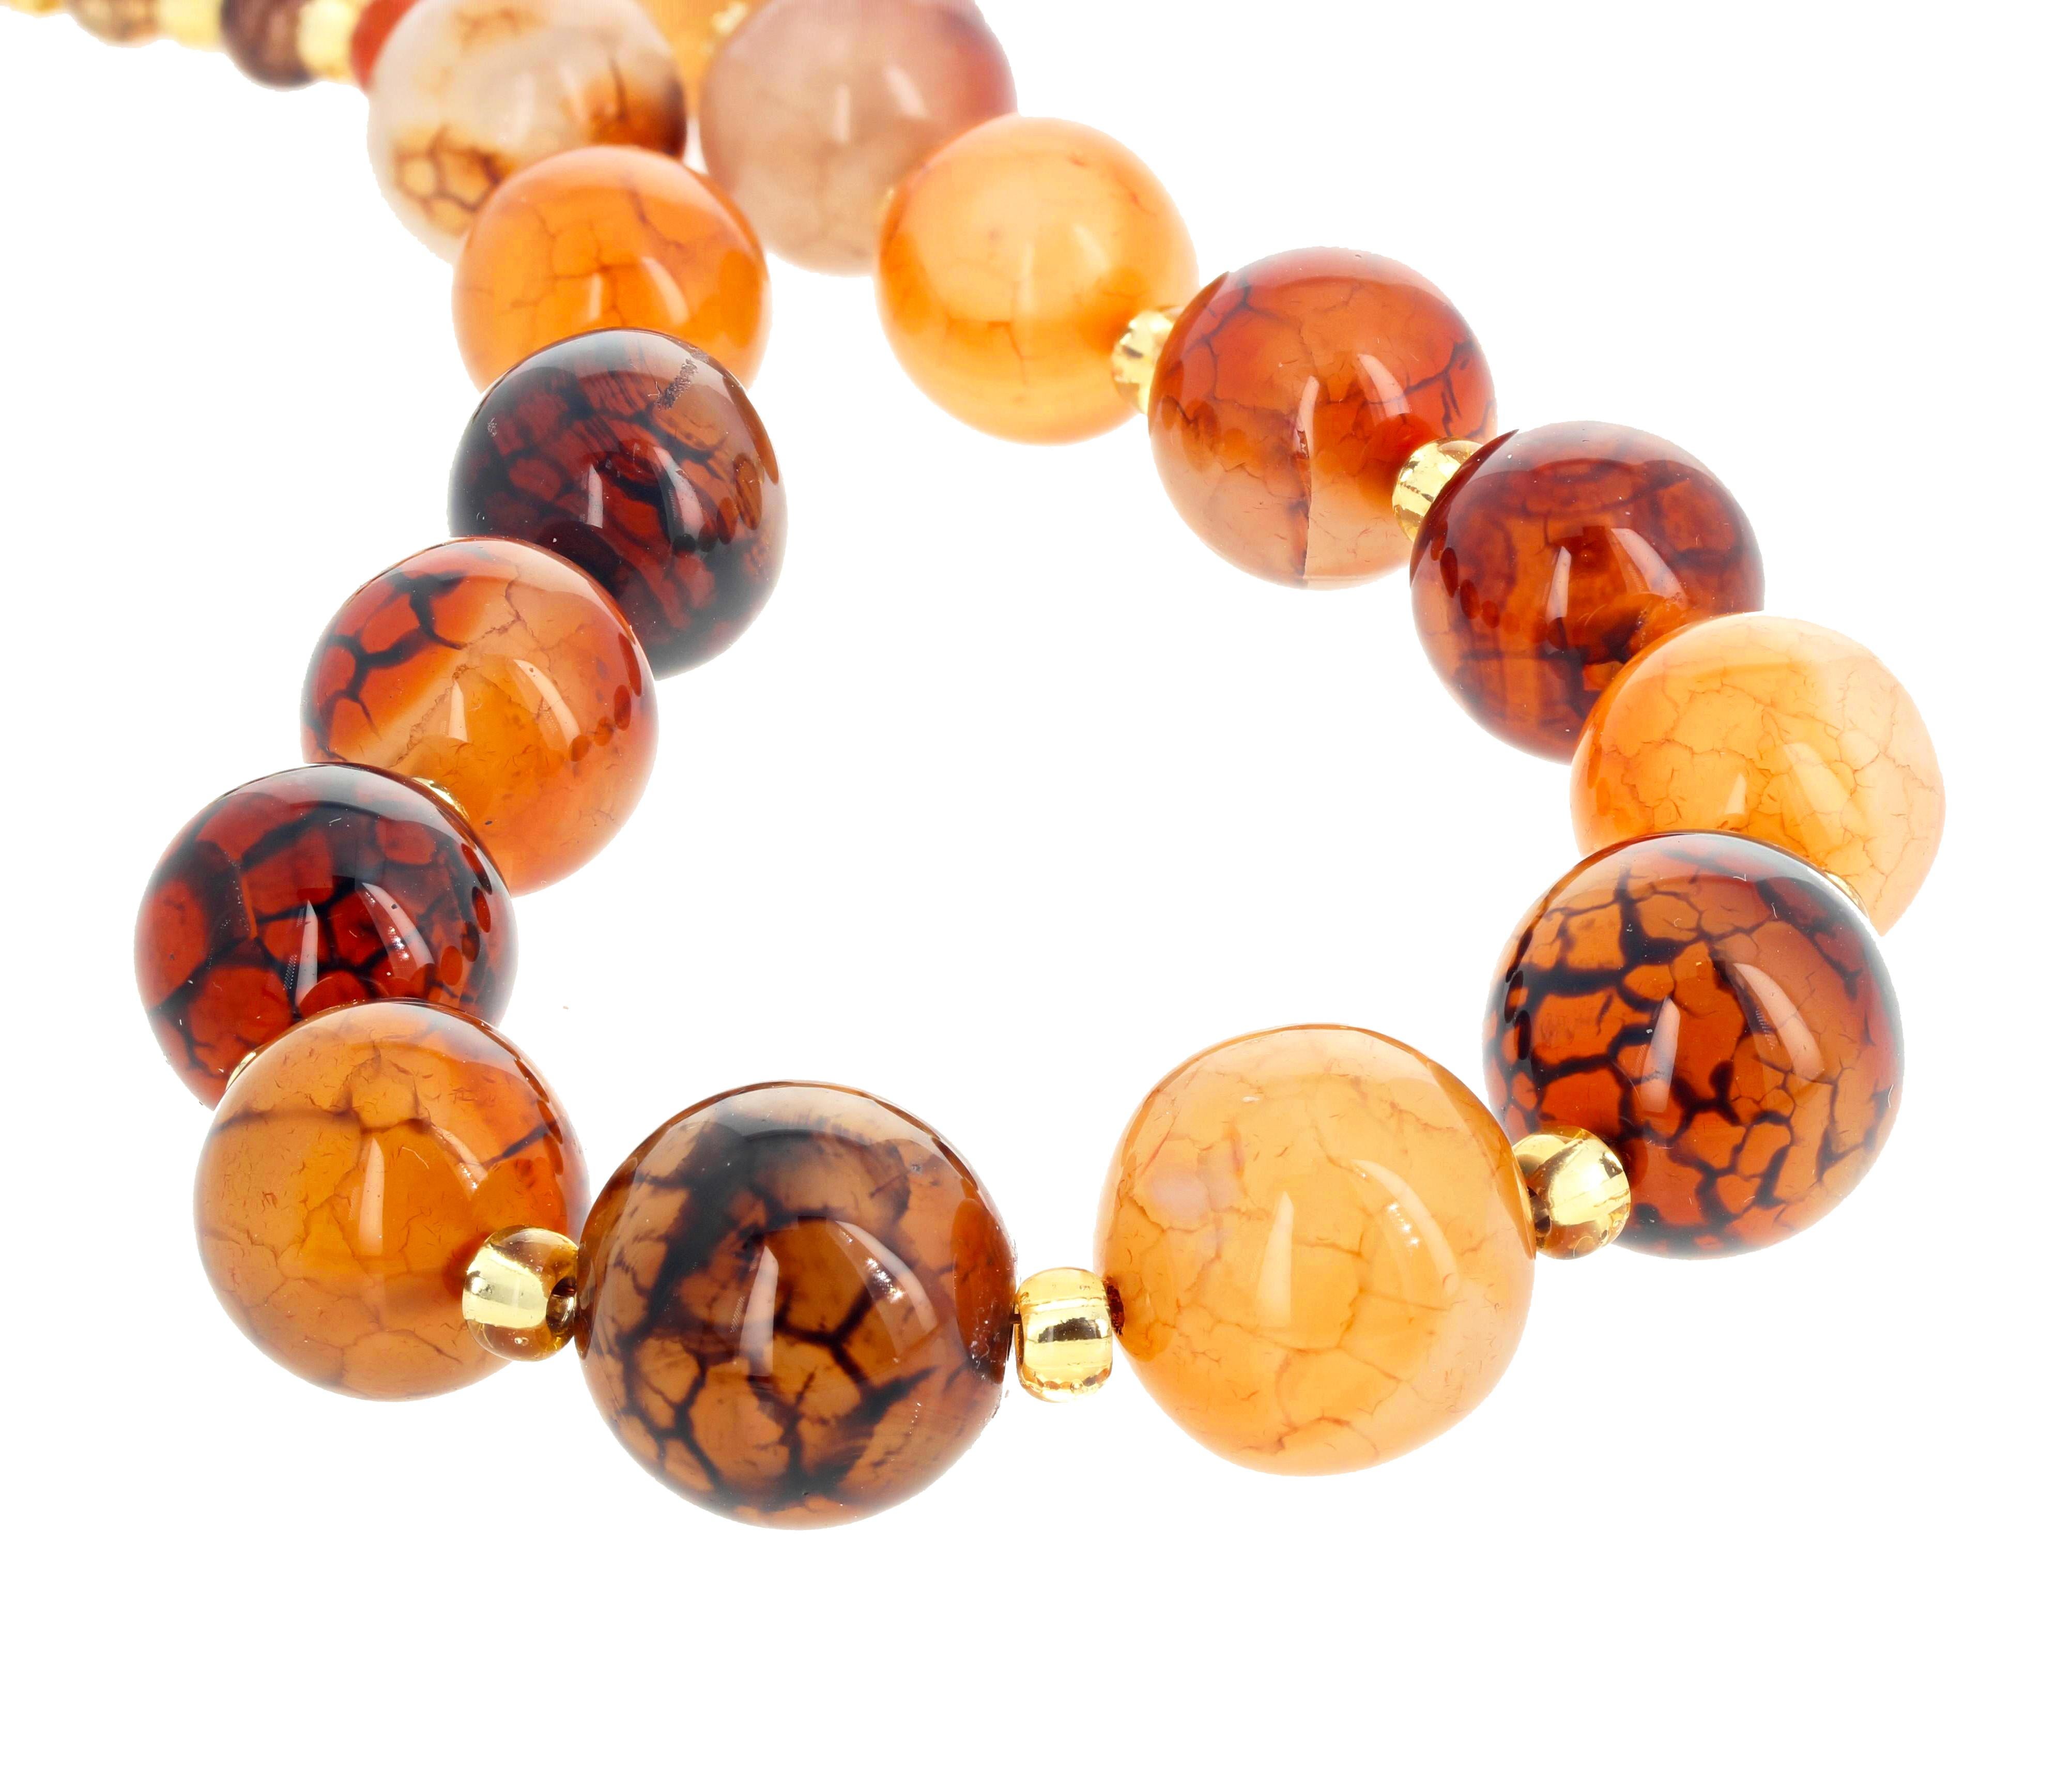 Gorgeous translucent glowing unique Spider Web Jasper (largest 20 mm) enhanced with brilliant glowing bright gold crystals set in this lovely 19 inch long necklace with gold tone hook easy to use clasp. 